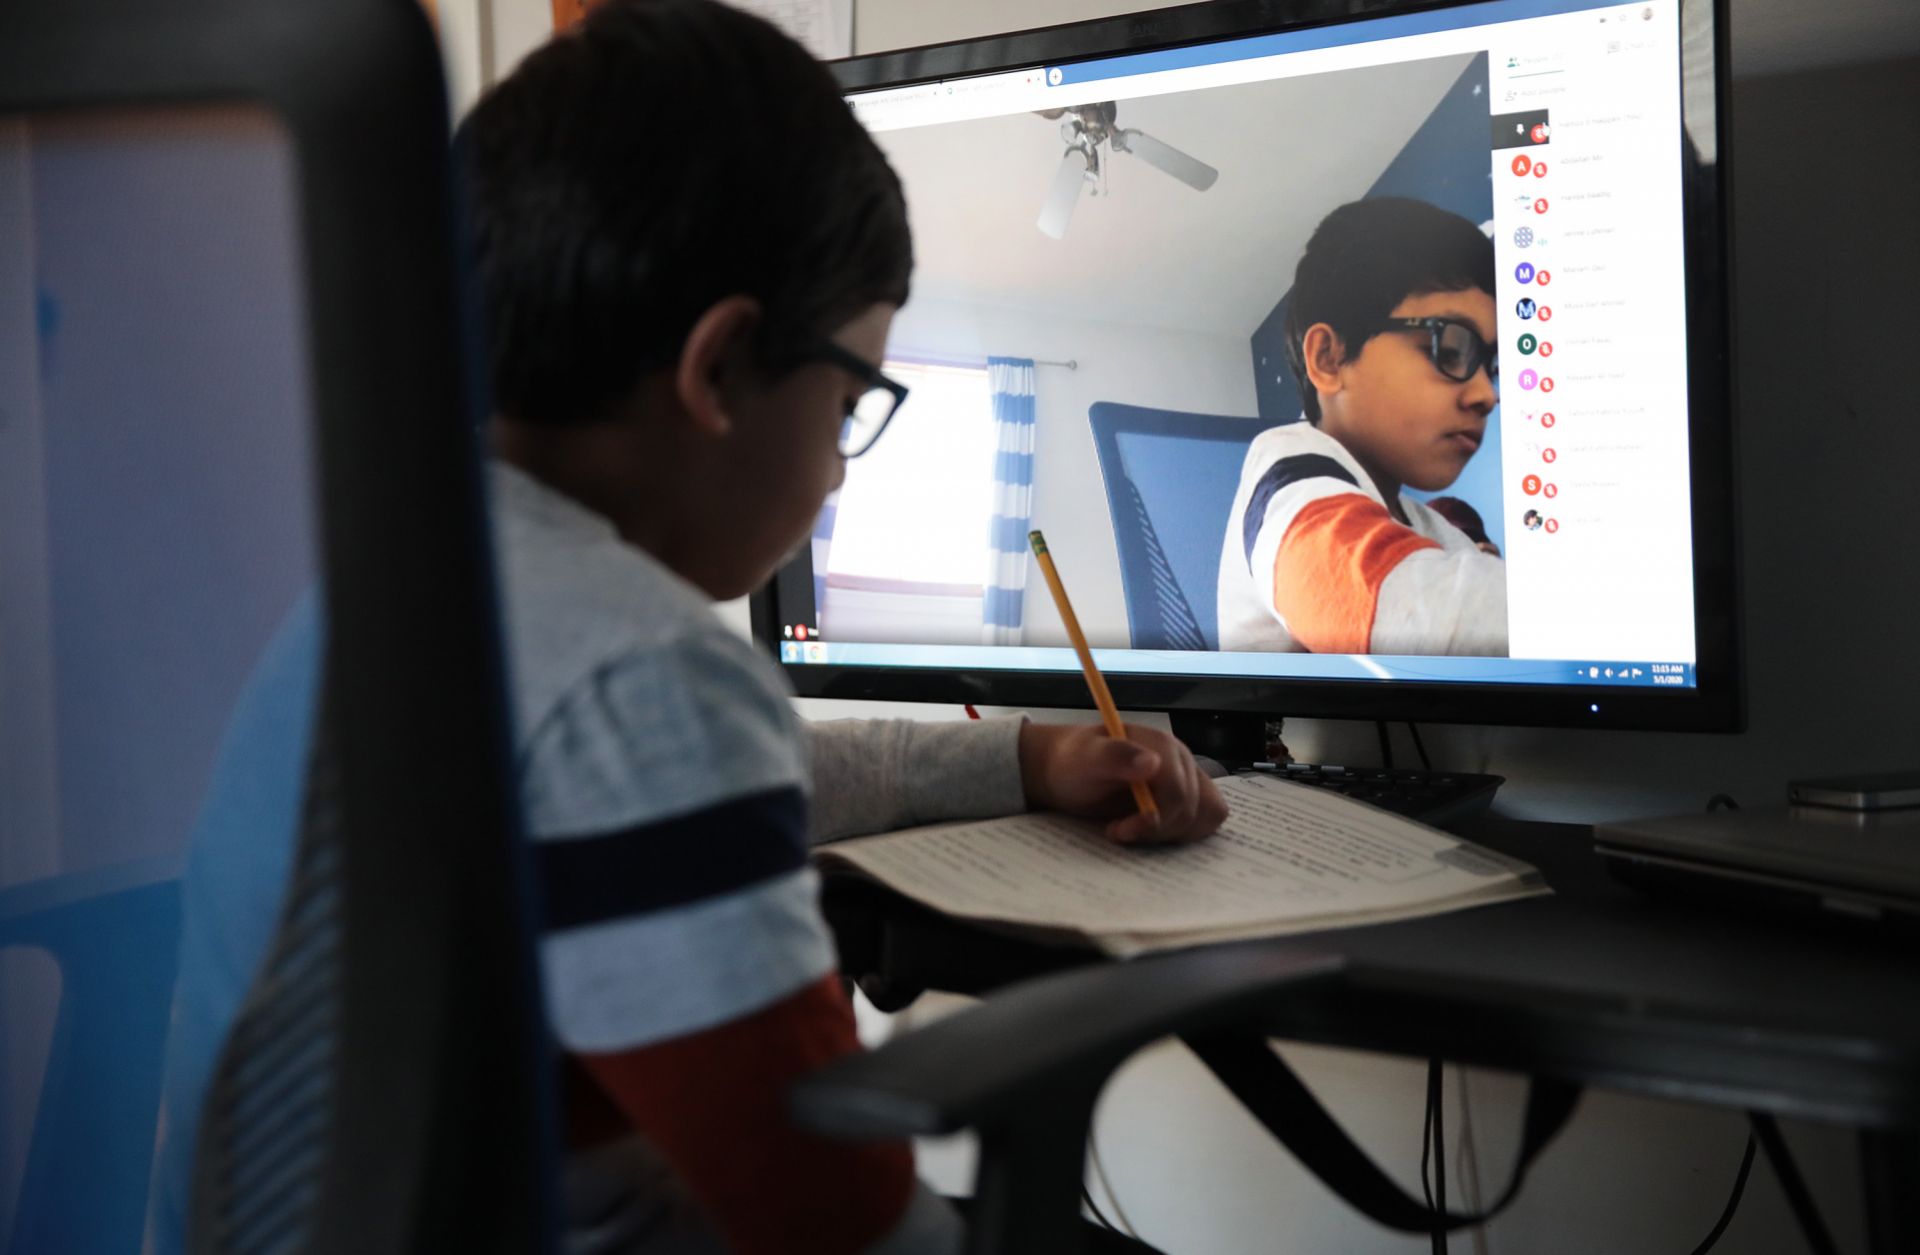 Seven-year-old Hamza Haqqani, a 2nd grade student at Al-Huda Academy, uses a computer to participate in an online class with his teacher and classmates at his home in Bartlett, Illinois, on May 1, 2020. Al-Huda Academy has had to adopt an e-learning program to finish the year after all schools in the state were forced to cancel classes to curb the spread of COVID-19. 